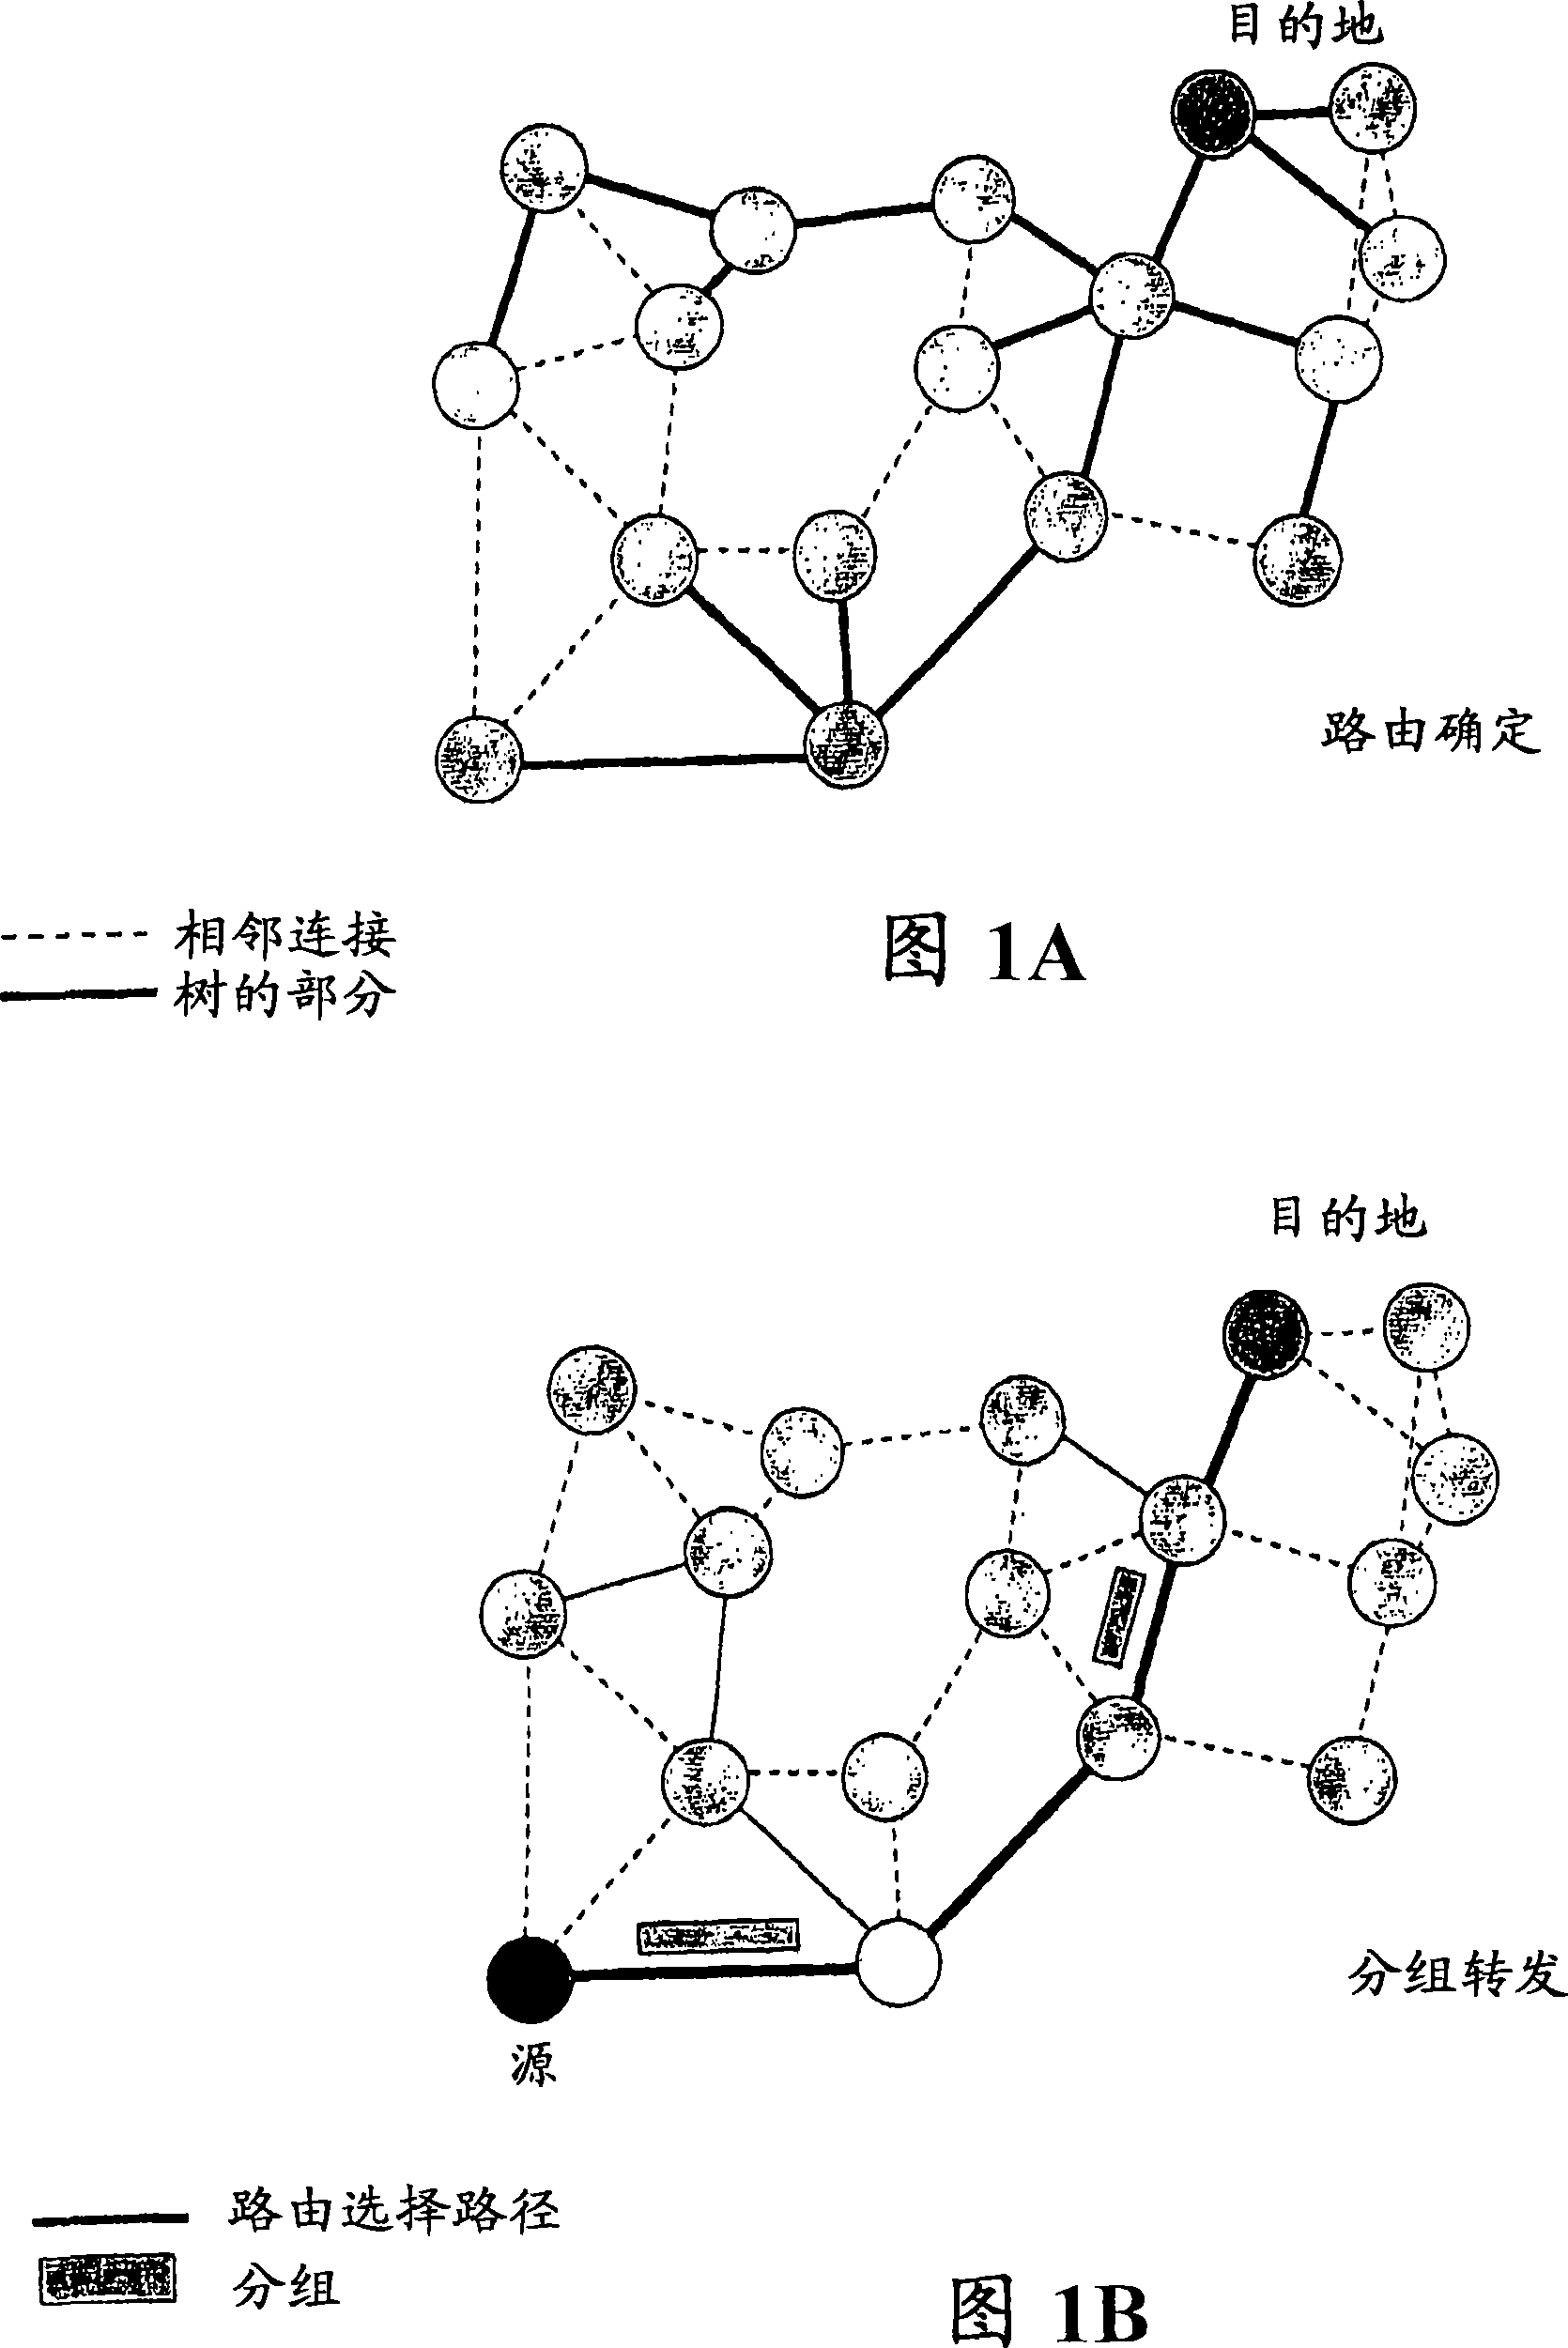 Method and arrangement for advanced routing metrics in multihop networks